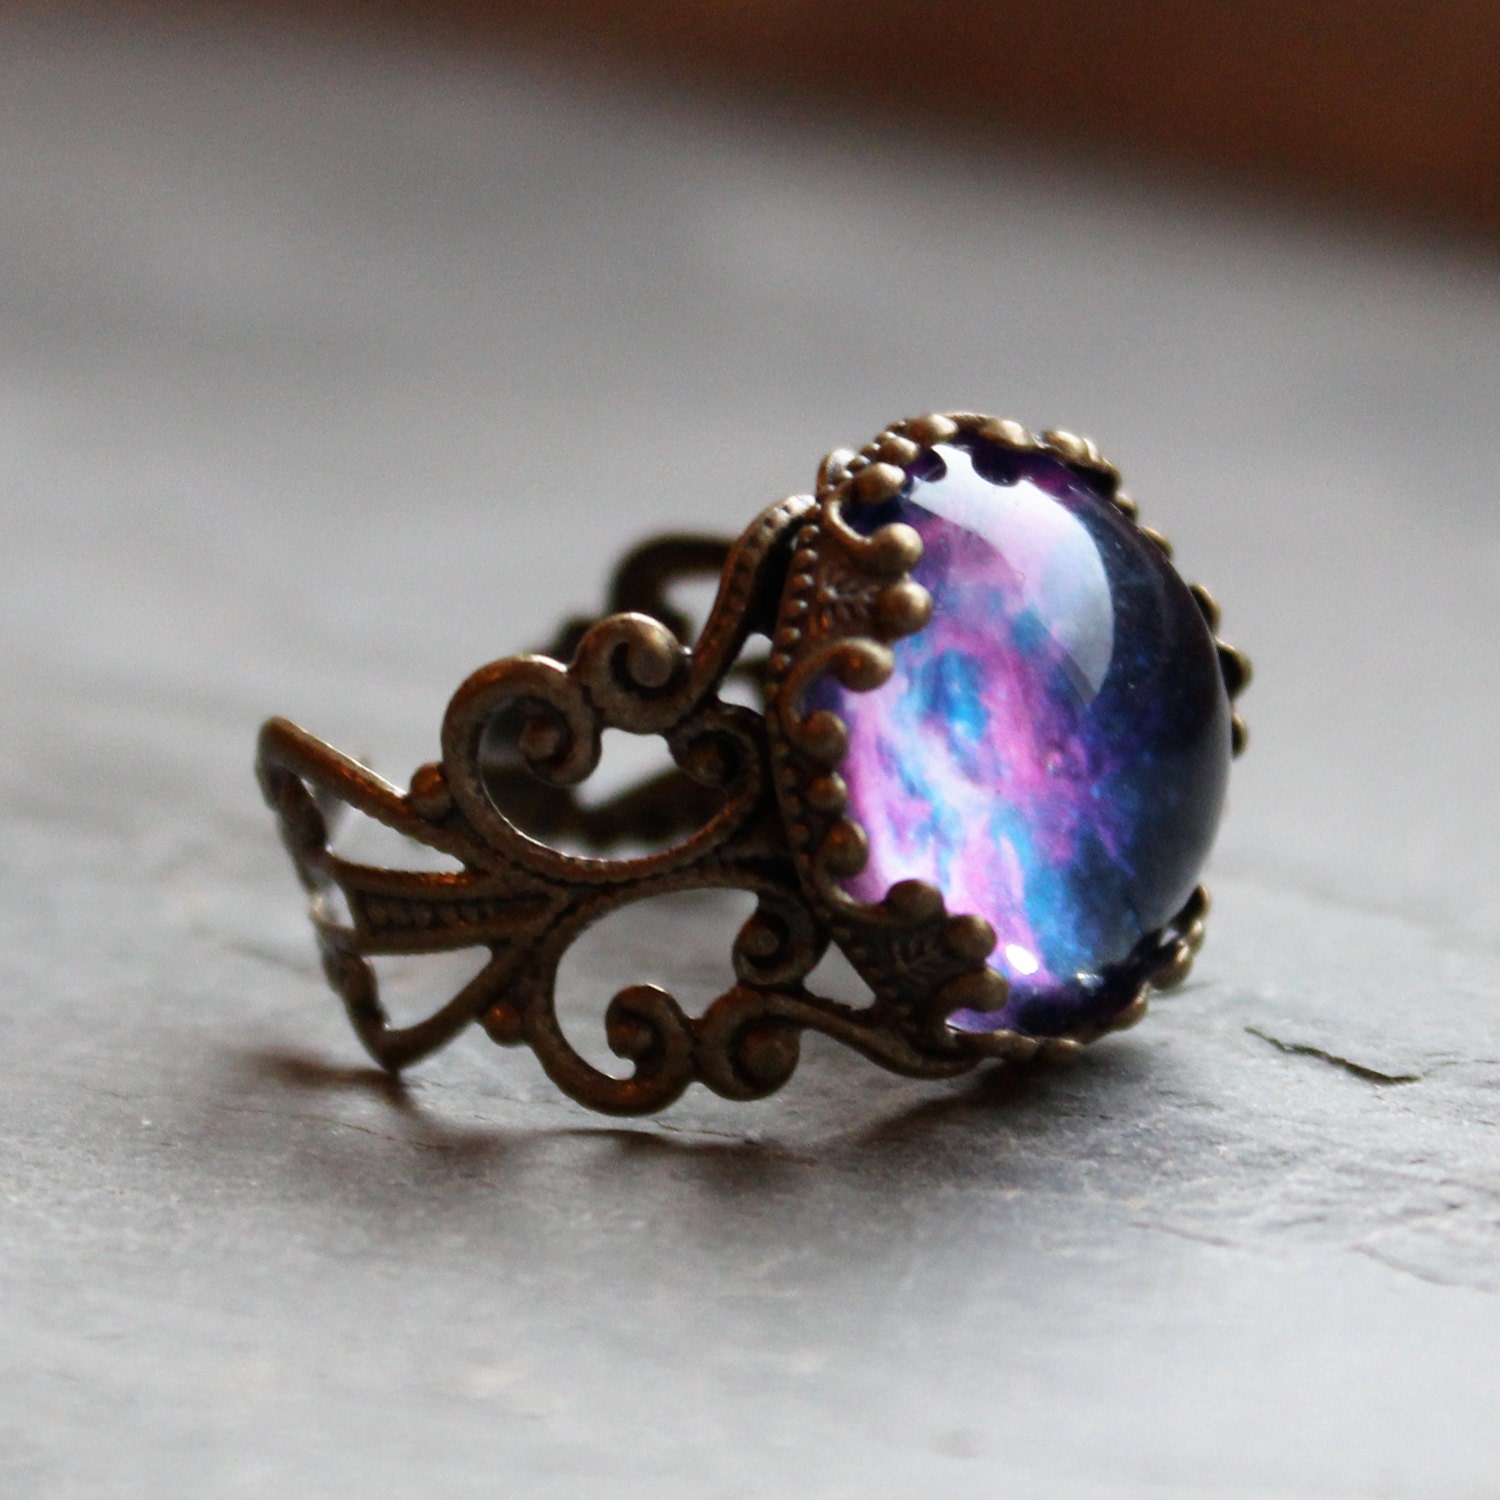 Violet Nebula Lacy Ring - Wanderlust Collection - Adjustable Ring,Valentines Day, Galaxy, Universe, Outer Space